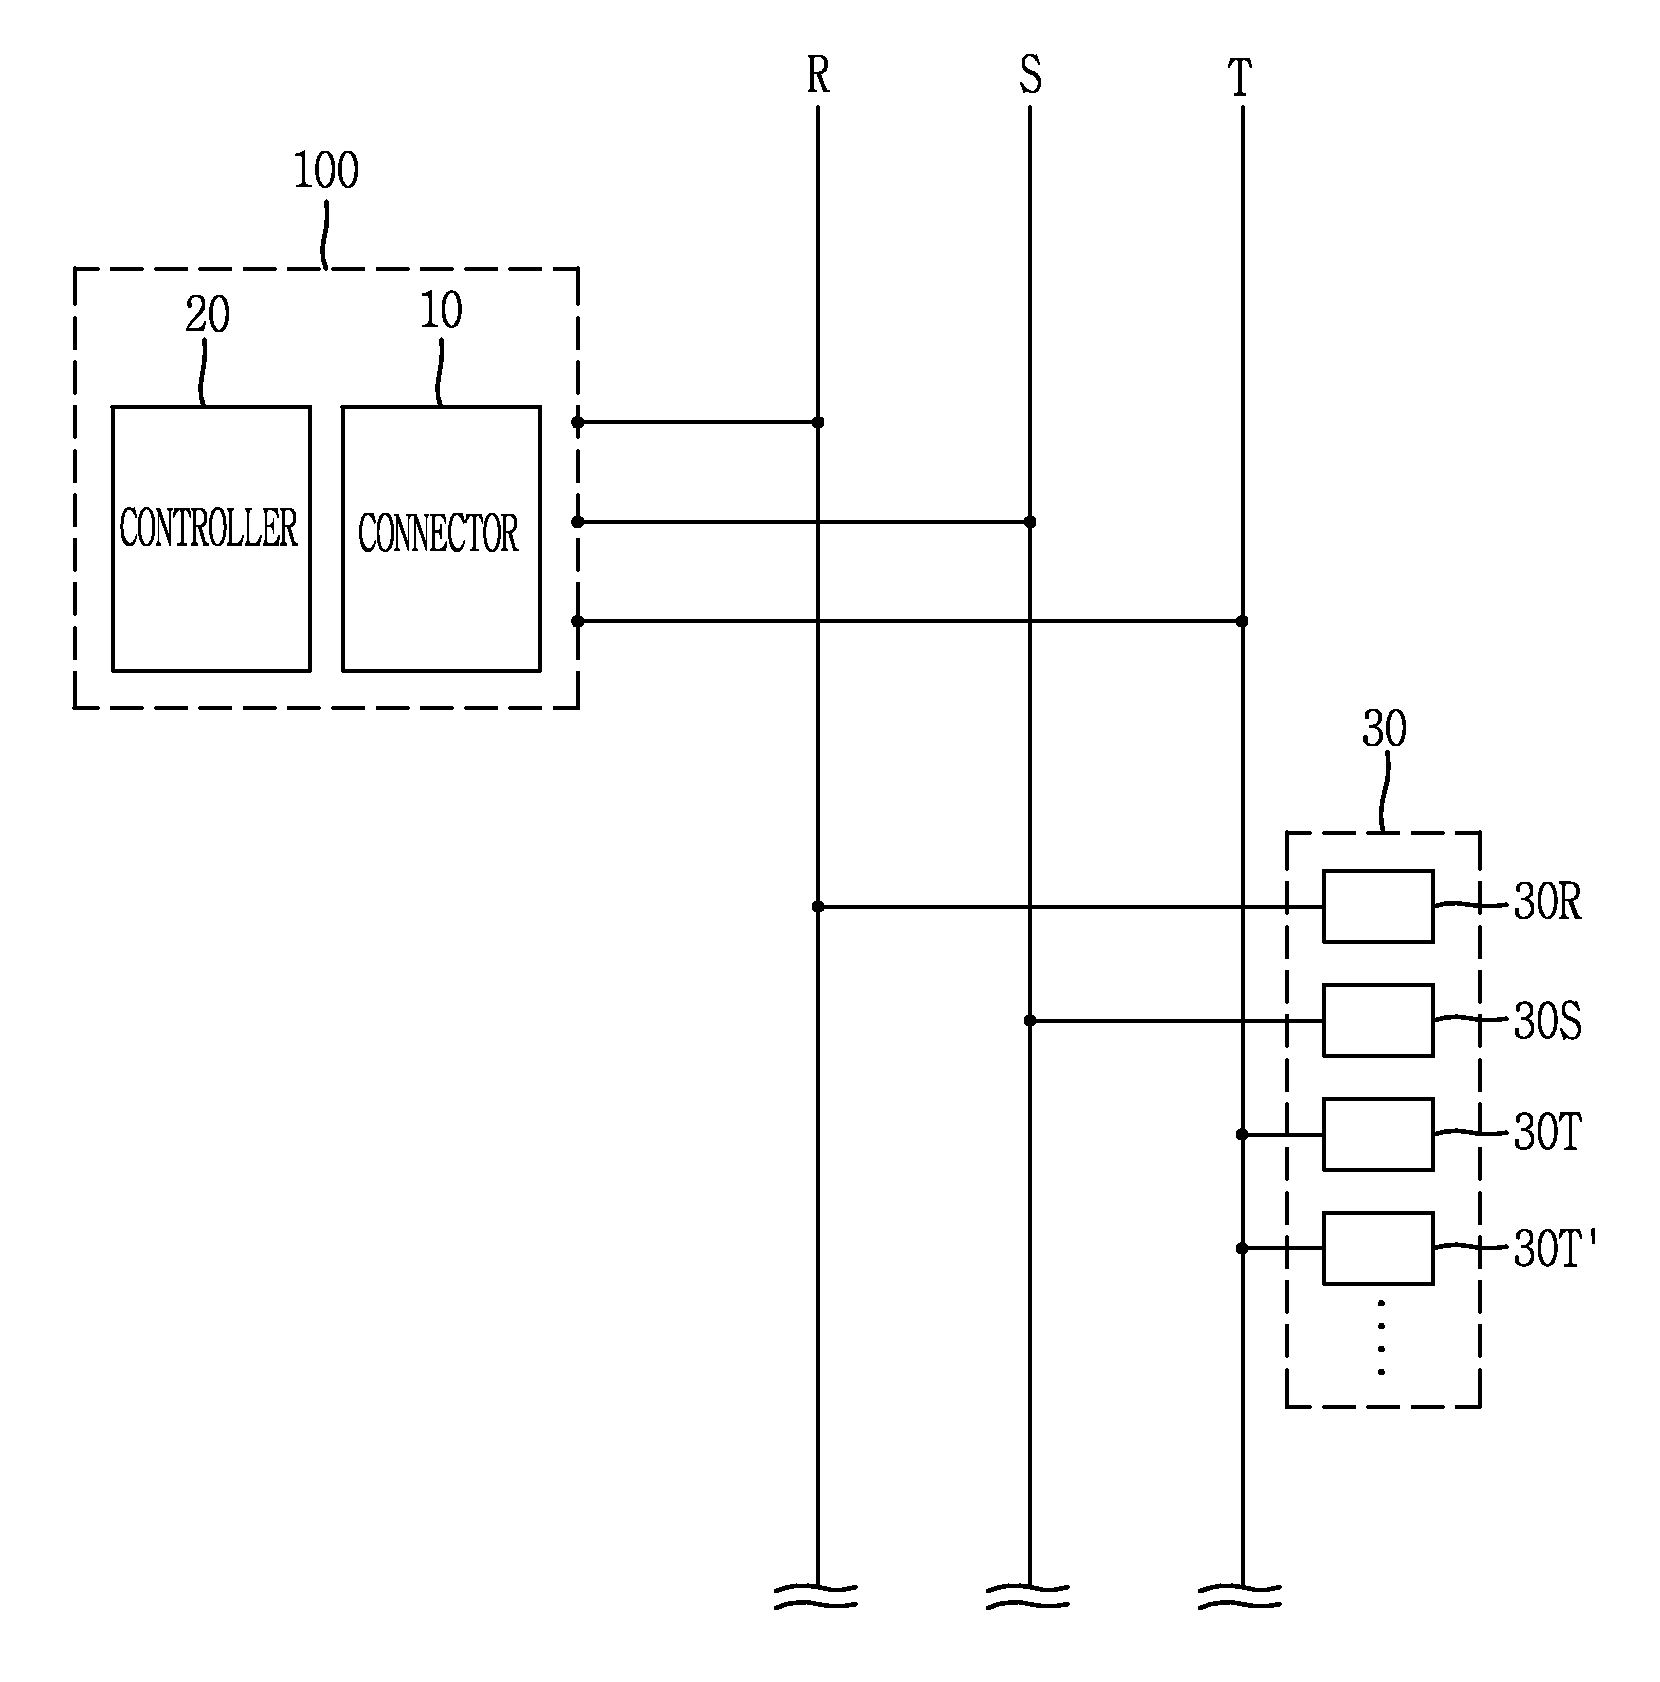 Apparatus for power line communication